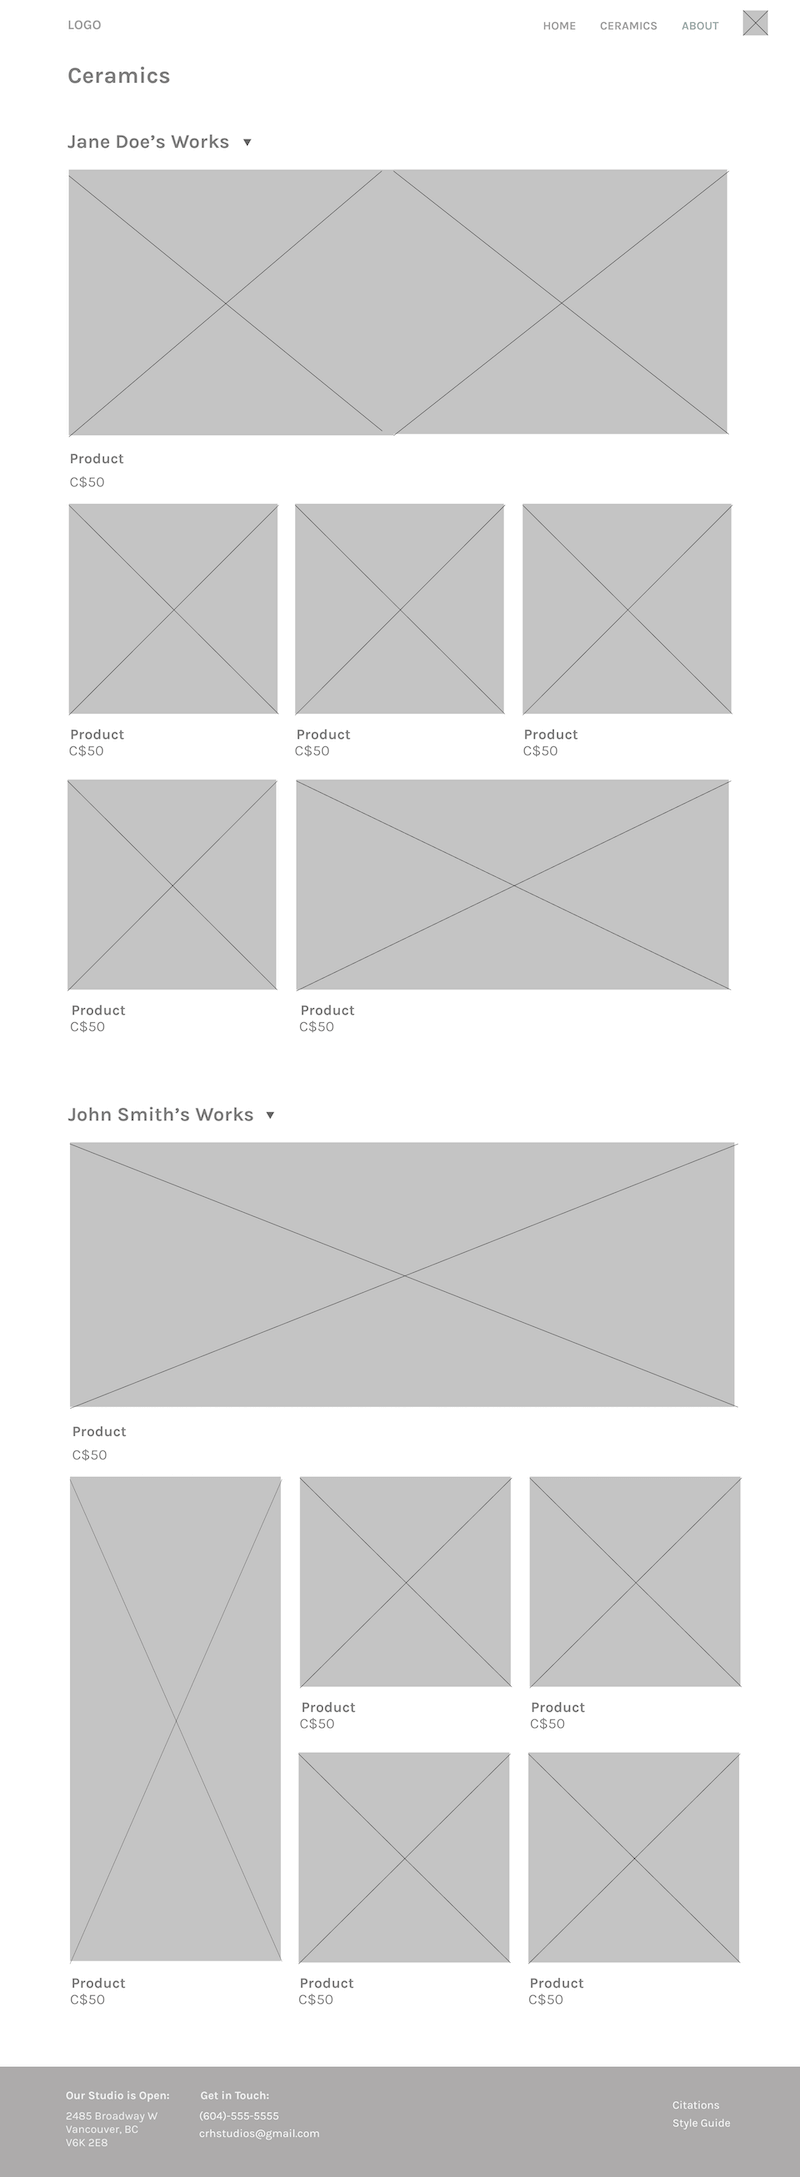 Wireframes for desktop products page of CRH Studios.